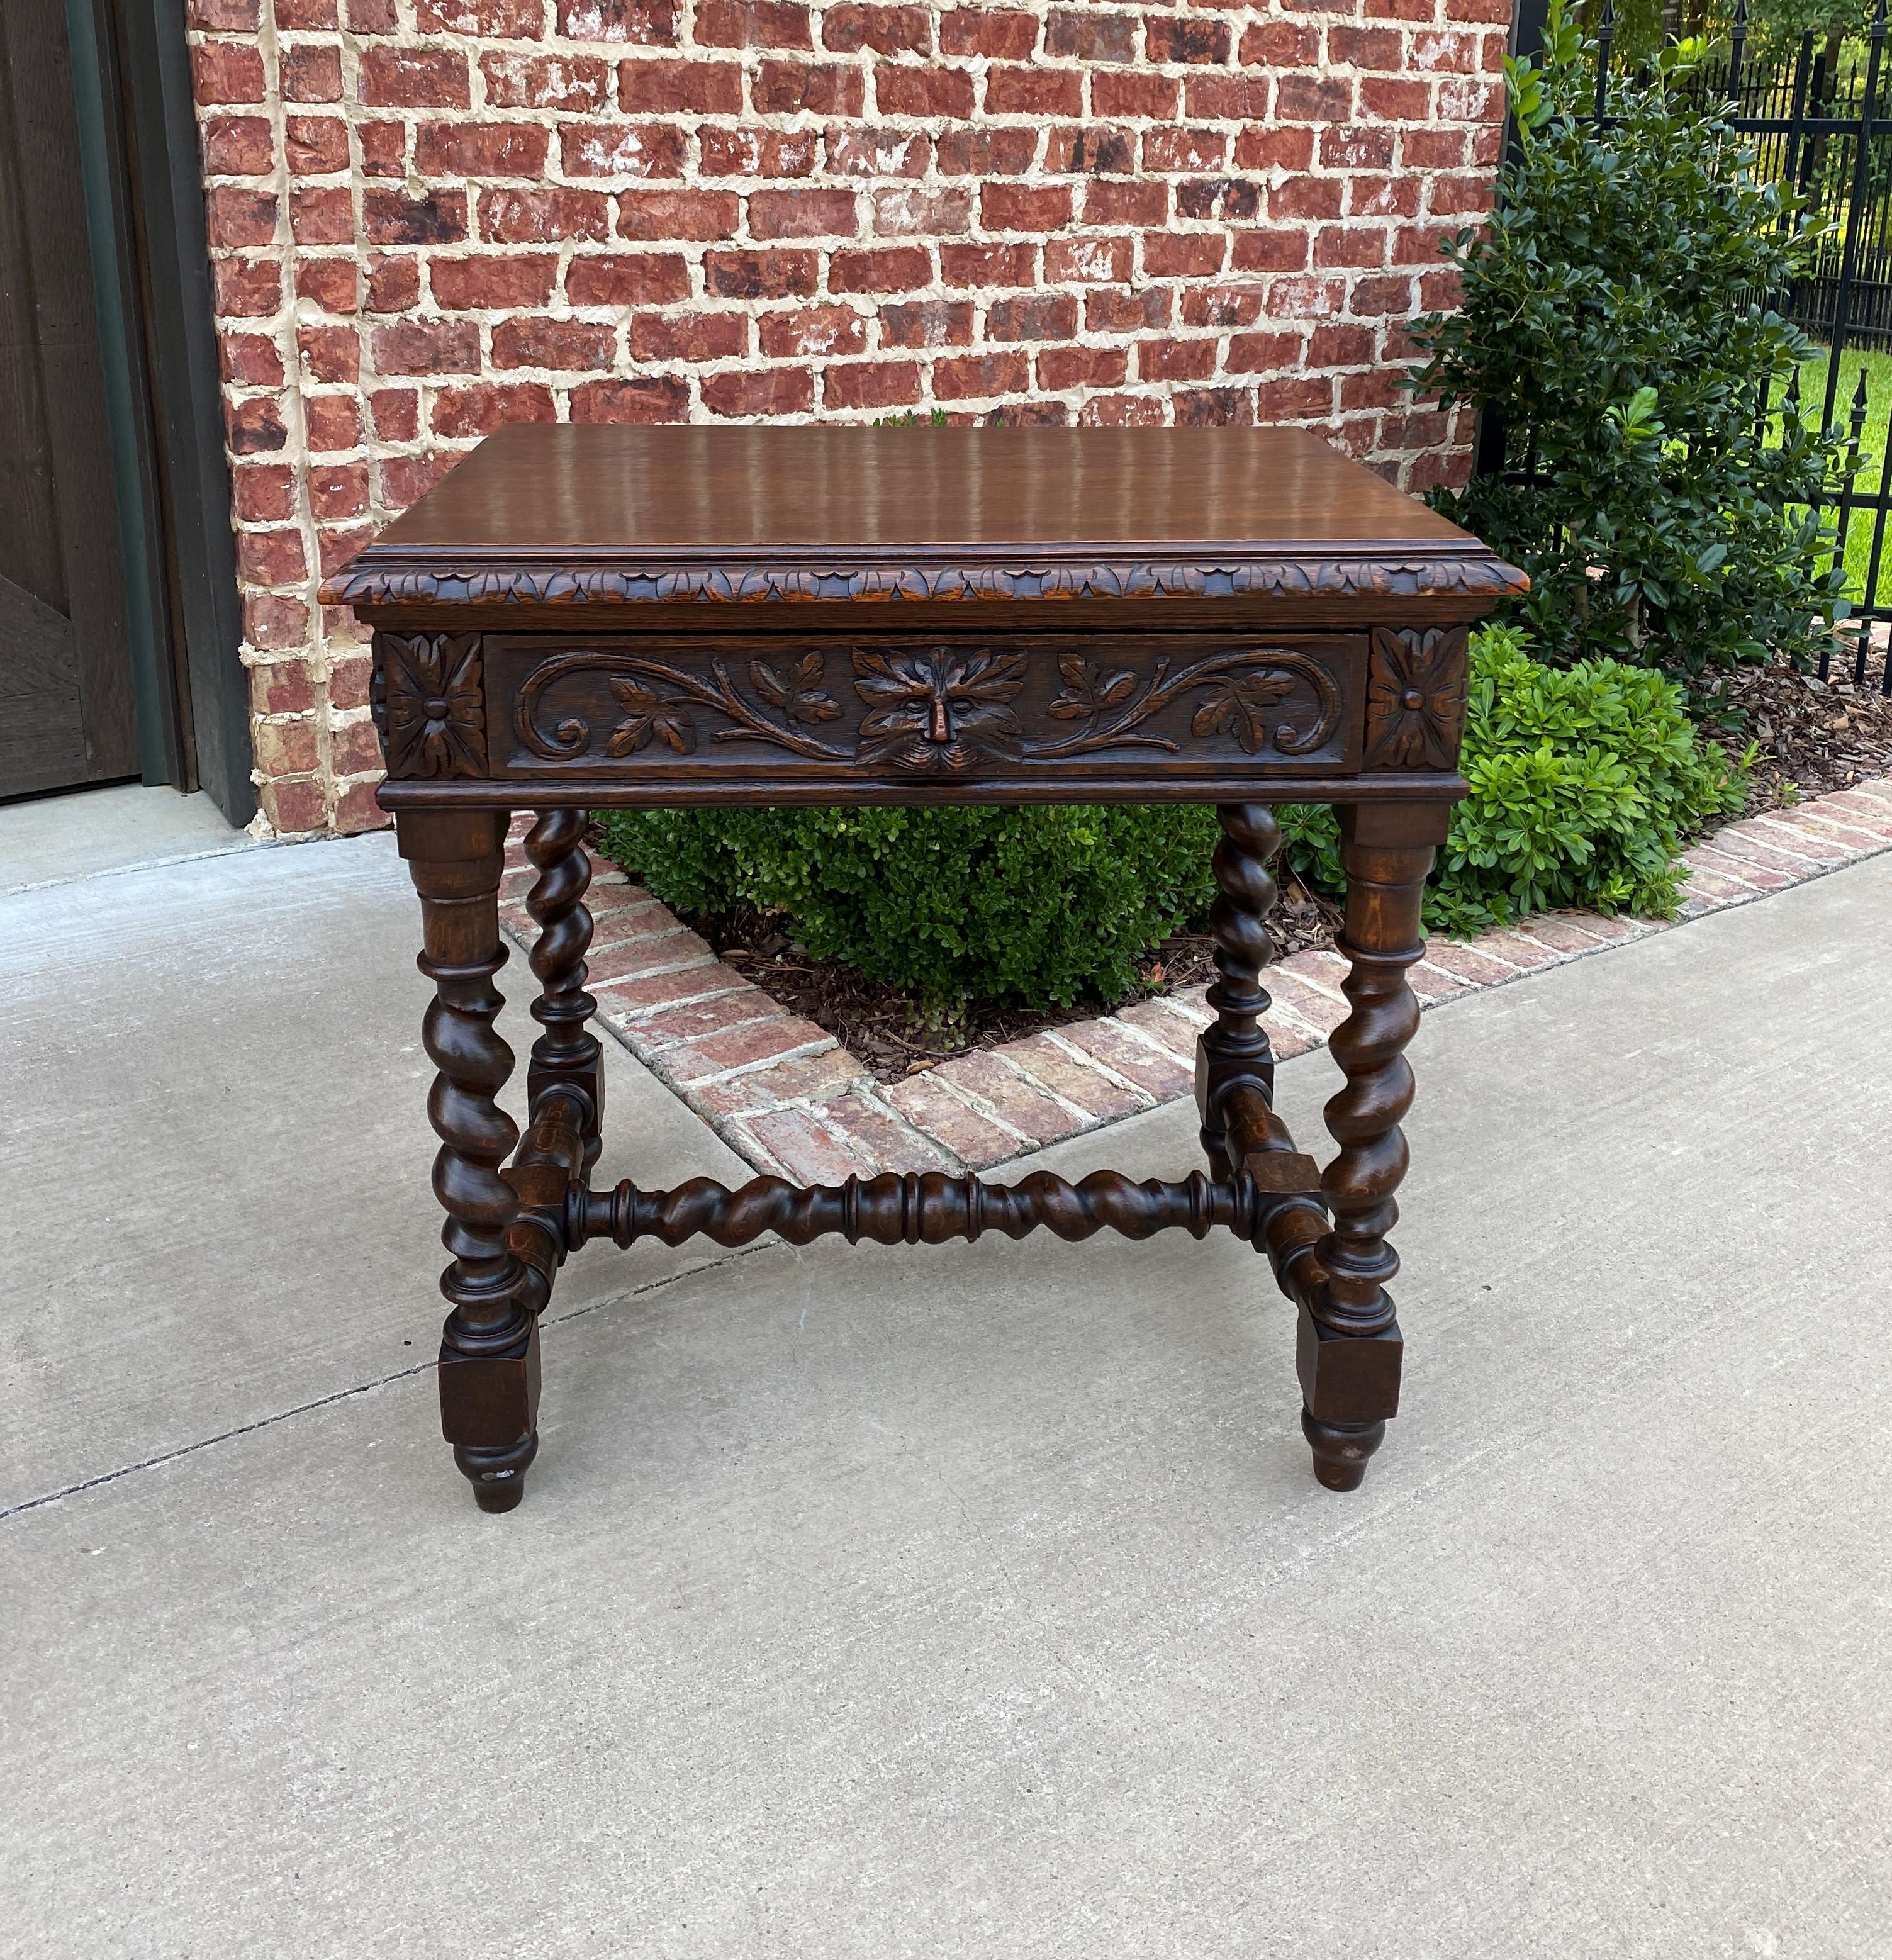 Beautiful 19th century antique French Oak Renaissance revival small desk, writing table, or nightstand with drawer~~Barley twist legs and stretcher~~c. 1880s 

With so many people working from home now, desks have become our most often requested